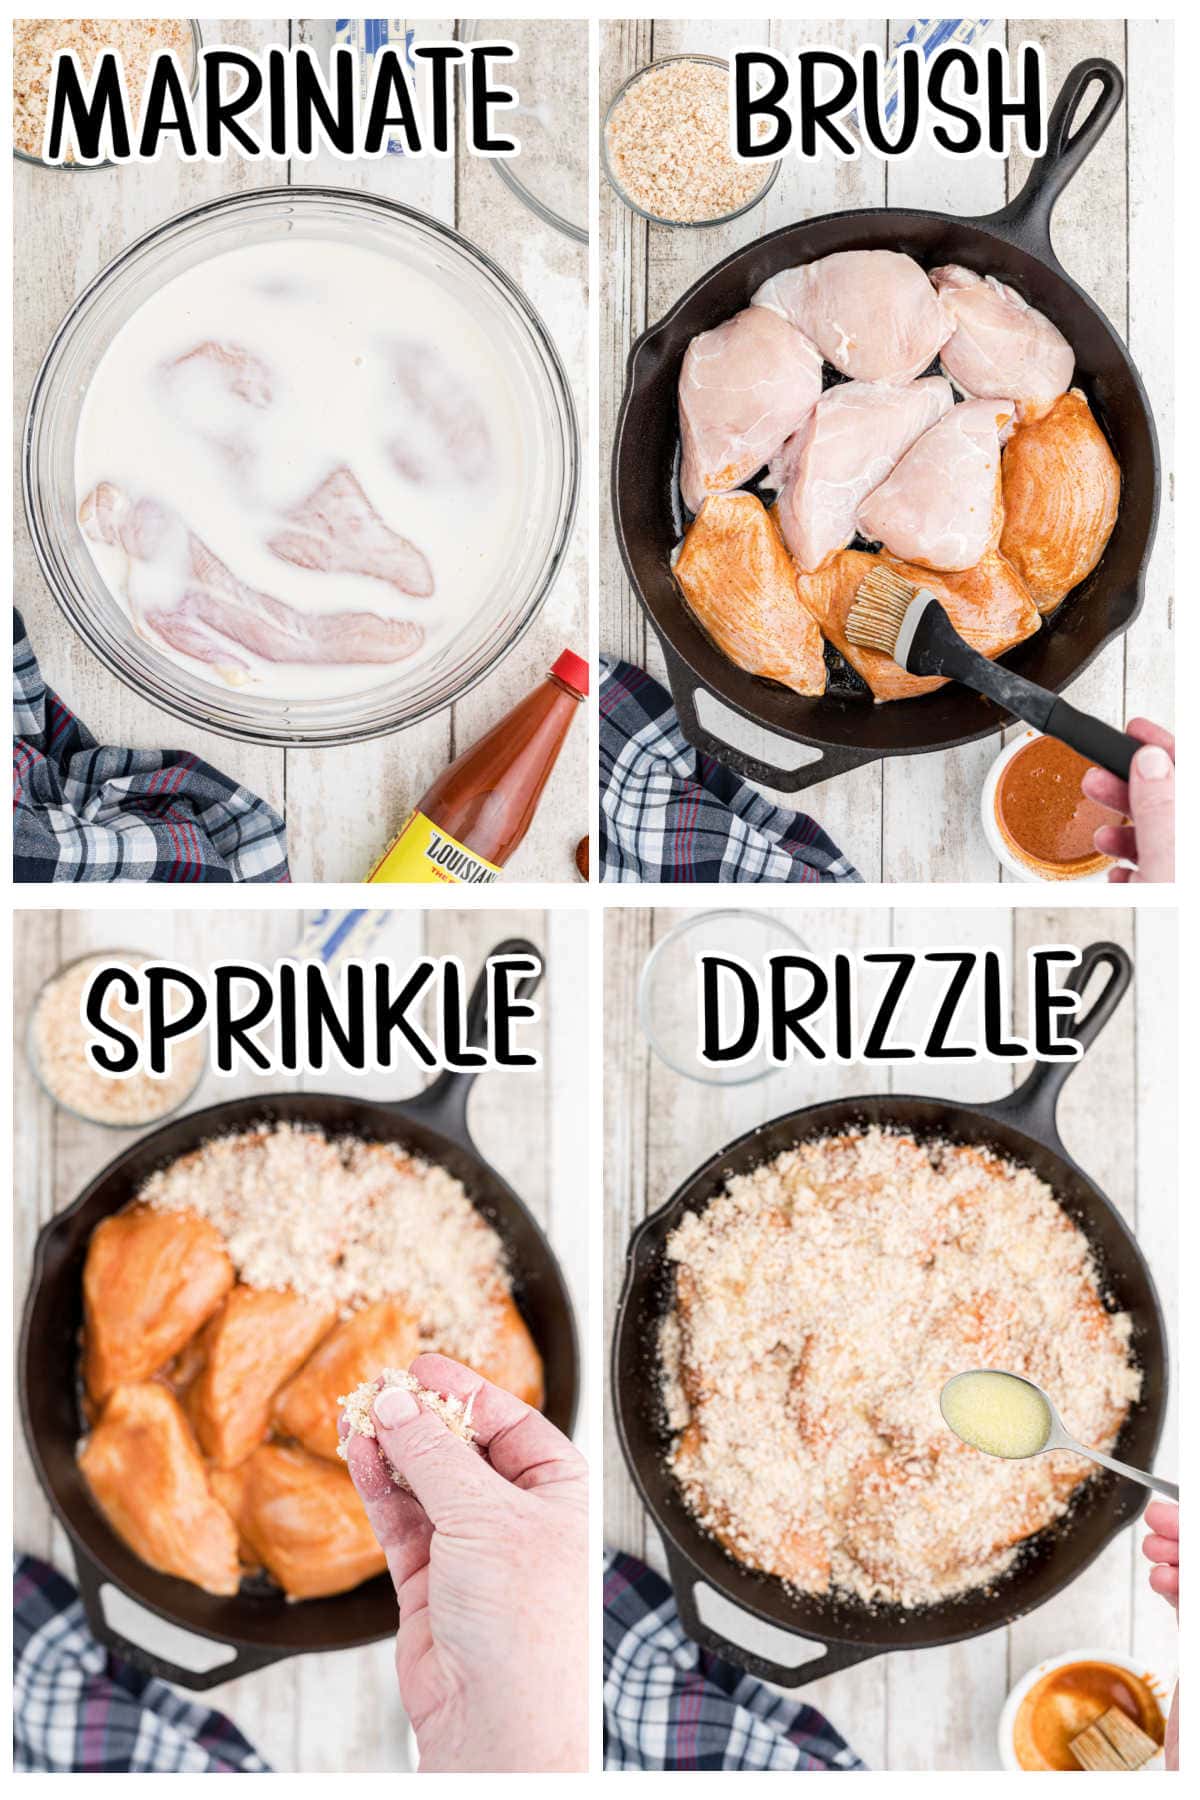 Step by step images showing how to make deviled chicken.